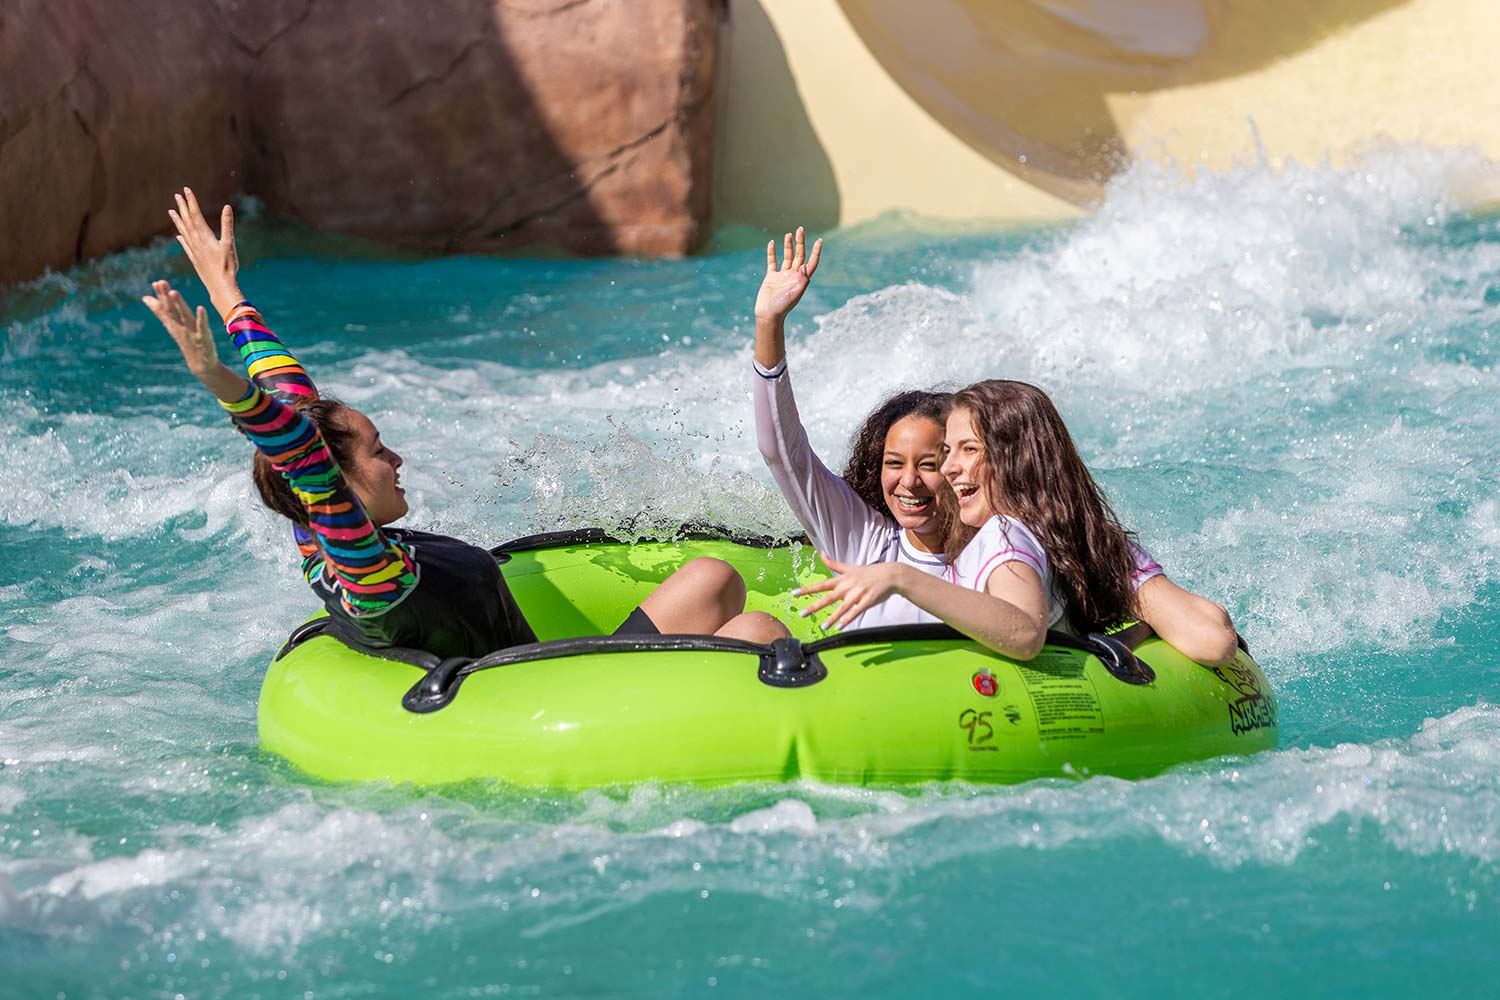 Desert Falls Water & Adventure Park Launches Again Its Ladies Only Night Wednesdays